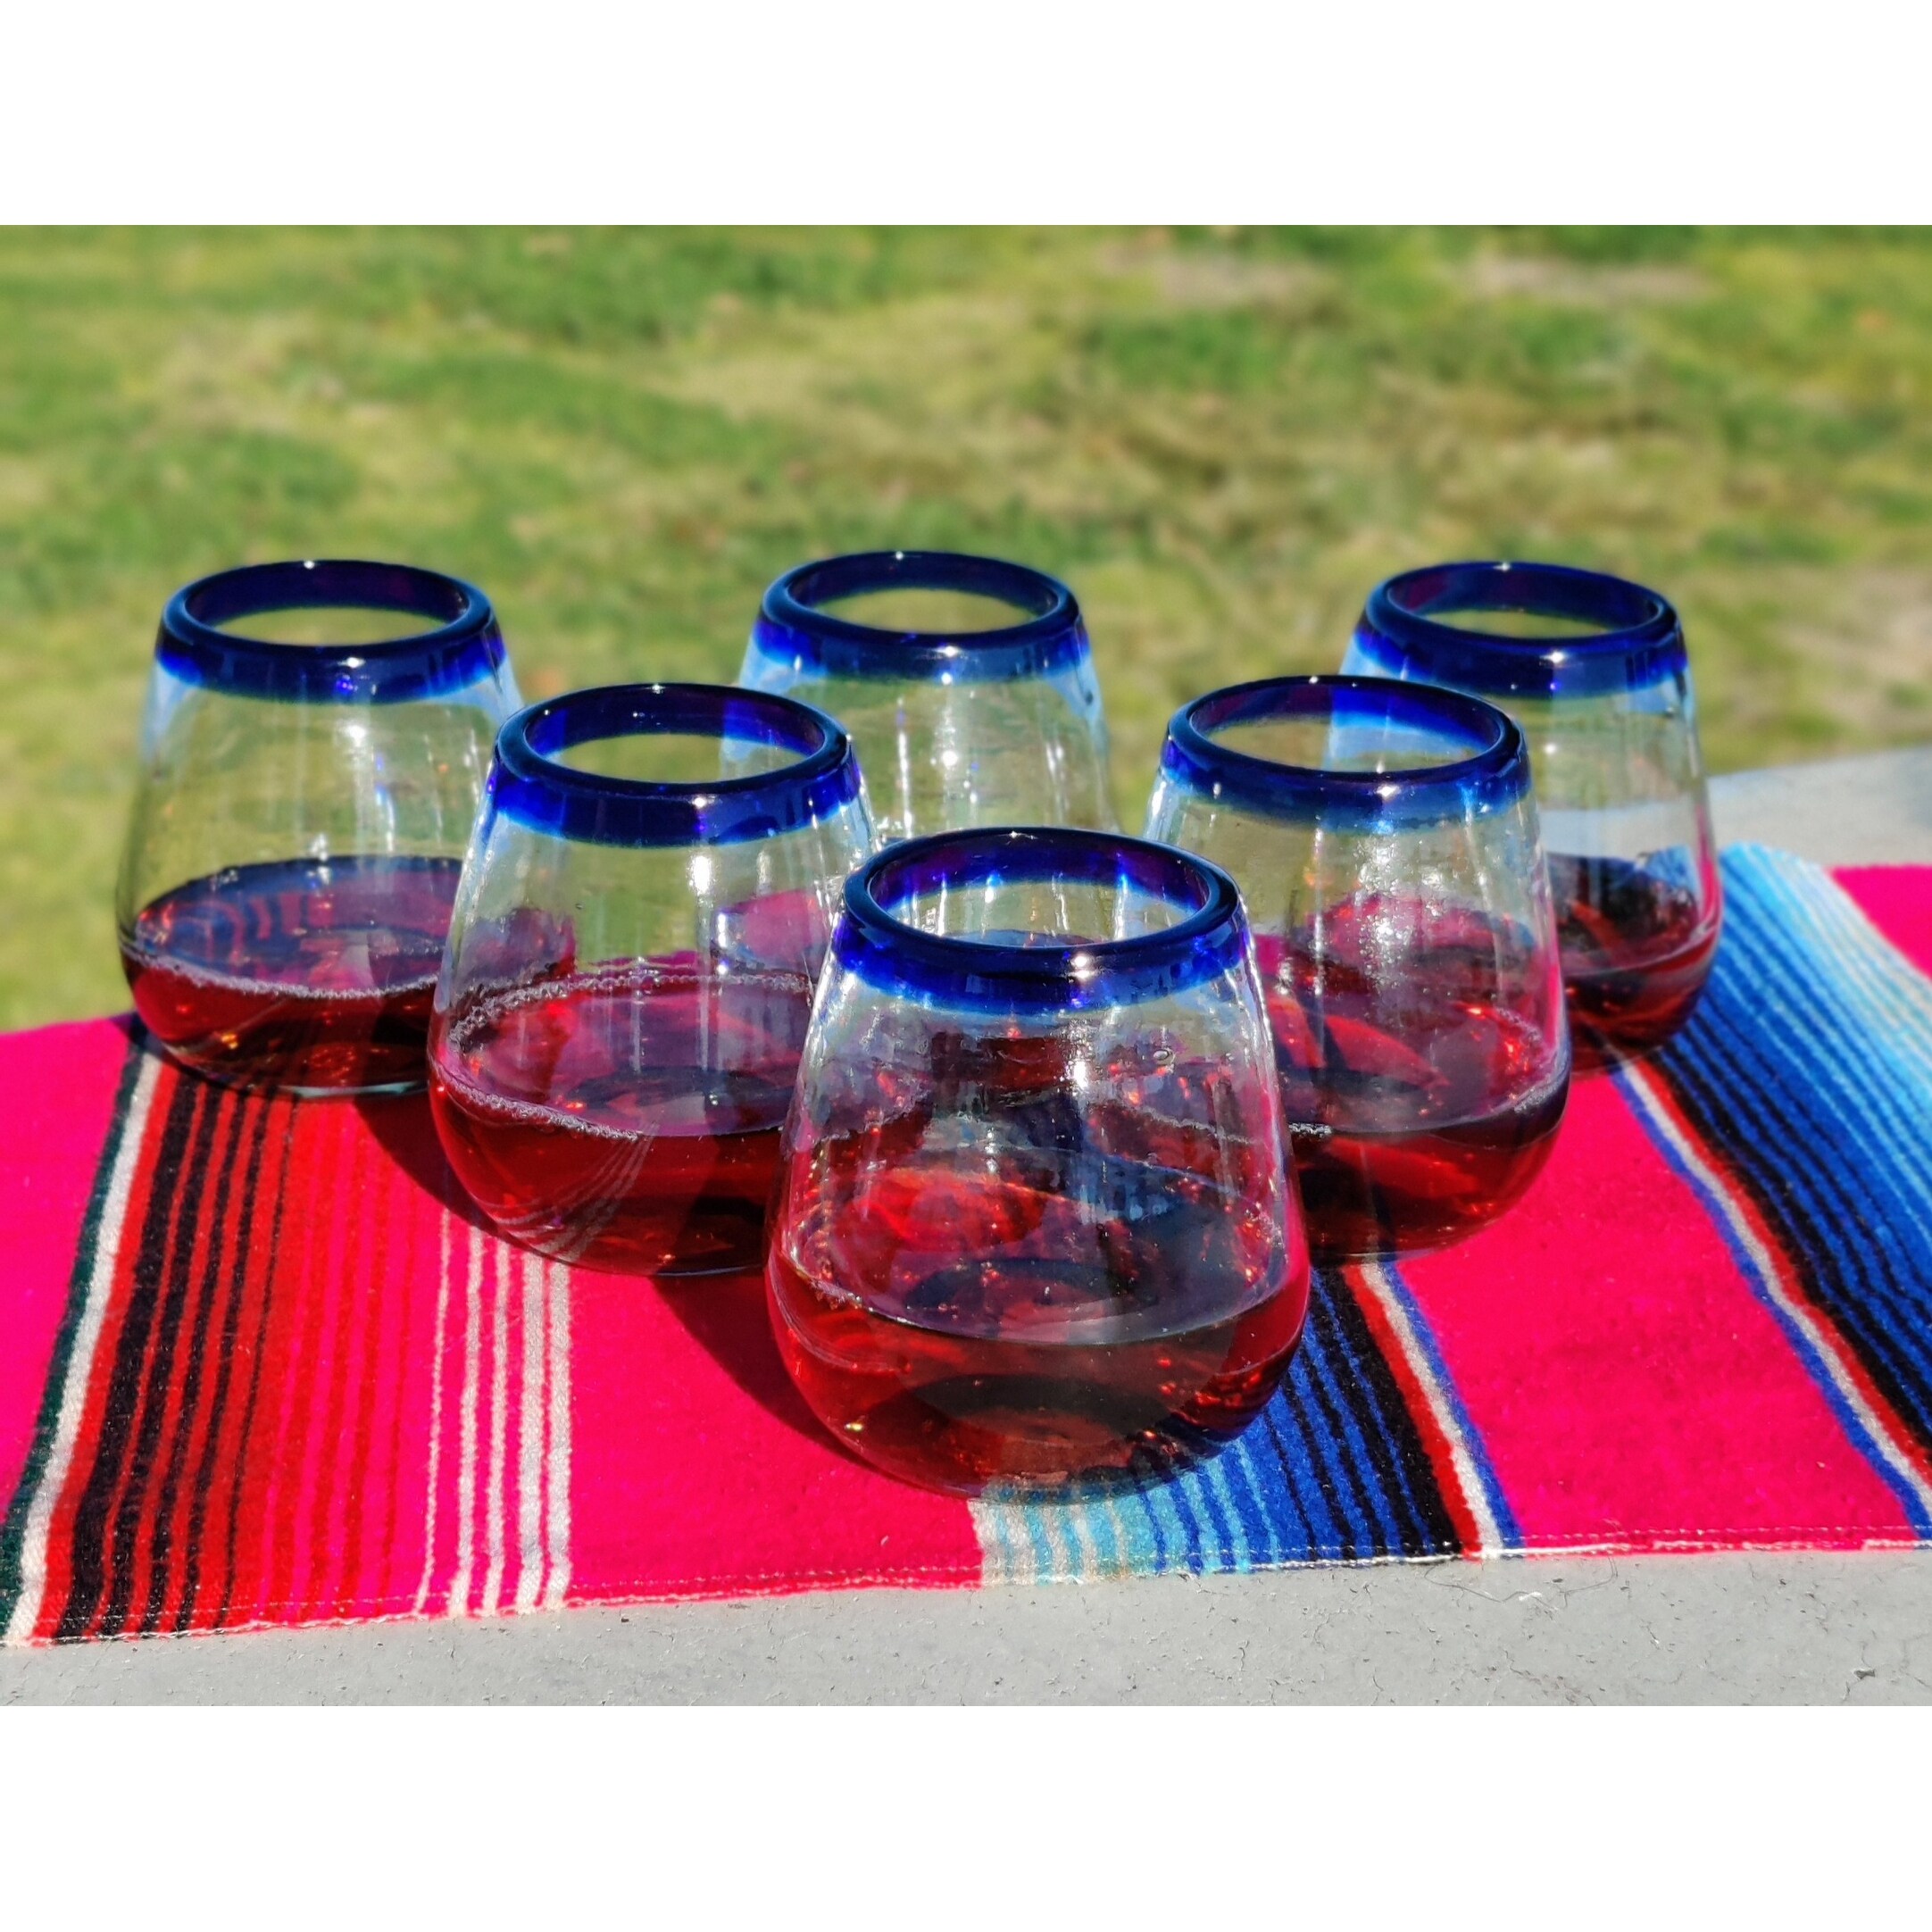 https://ak1.ostkcdn.com/images/products/is/images/direct/c67031fe809a69da905fdb956257f4fa28ac352e/Hand-Blown-Mexican-Stemless-Wine-Glasses---Set-of-6-Glasses-with-Cobalt-Blue-Rims-%2815-oz%29.jpg